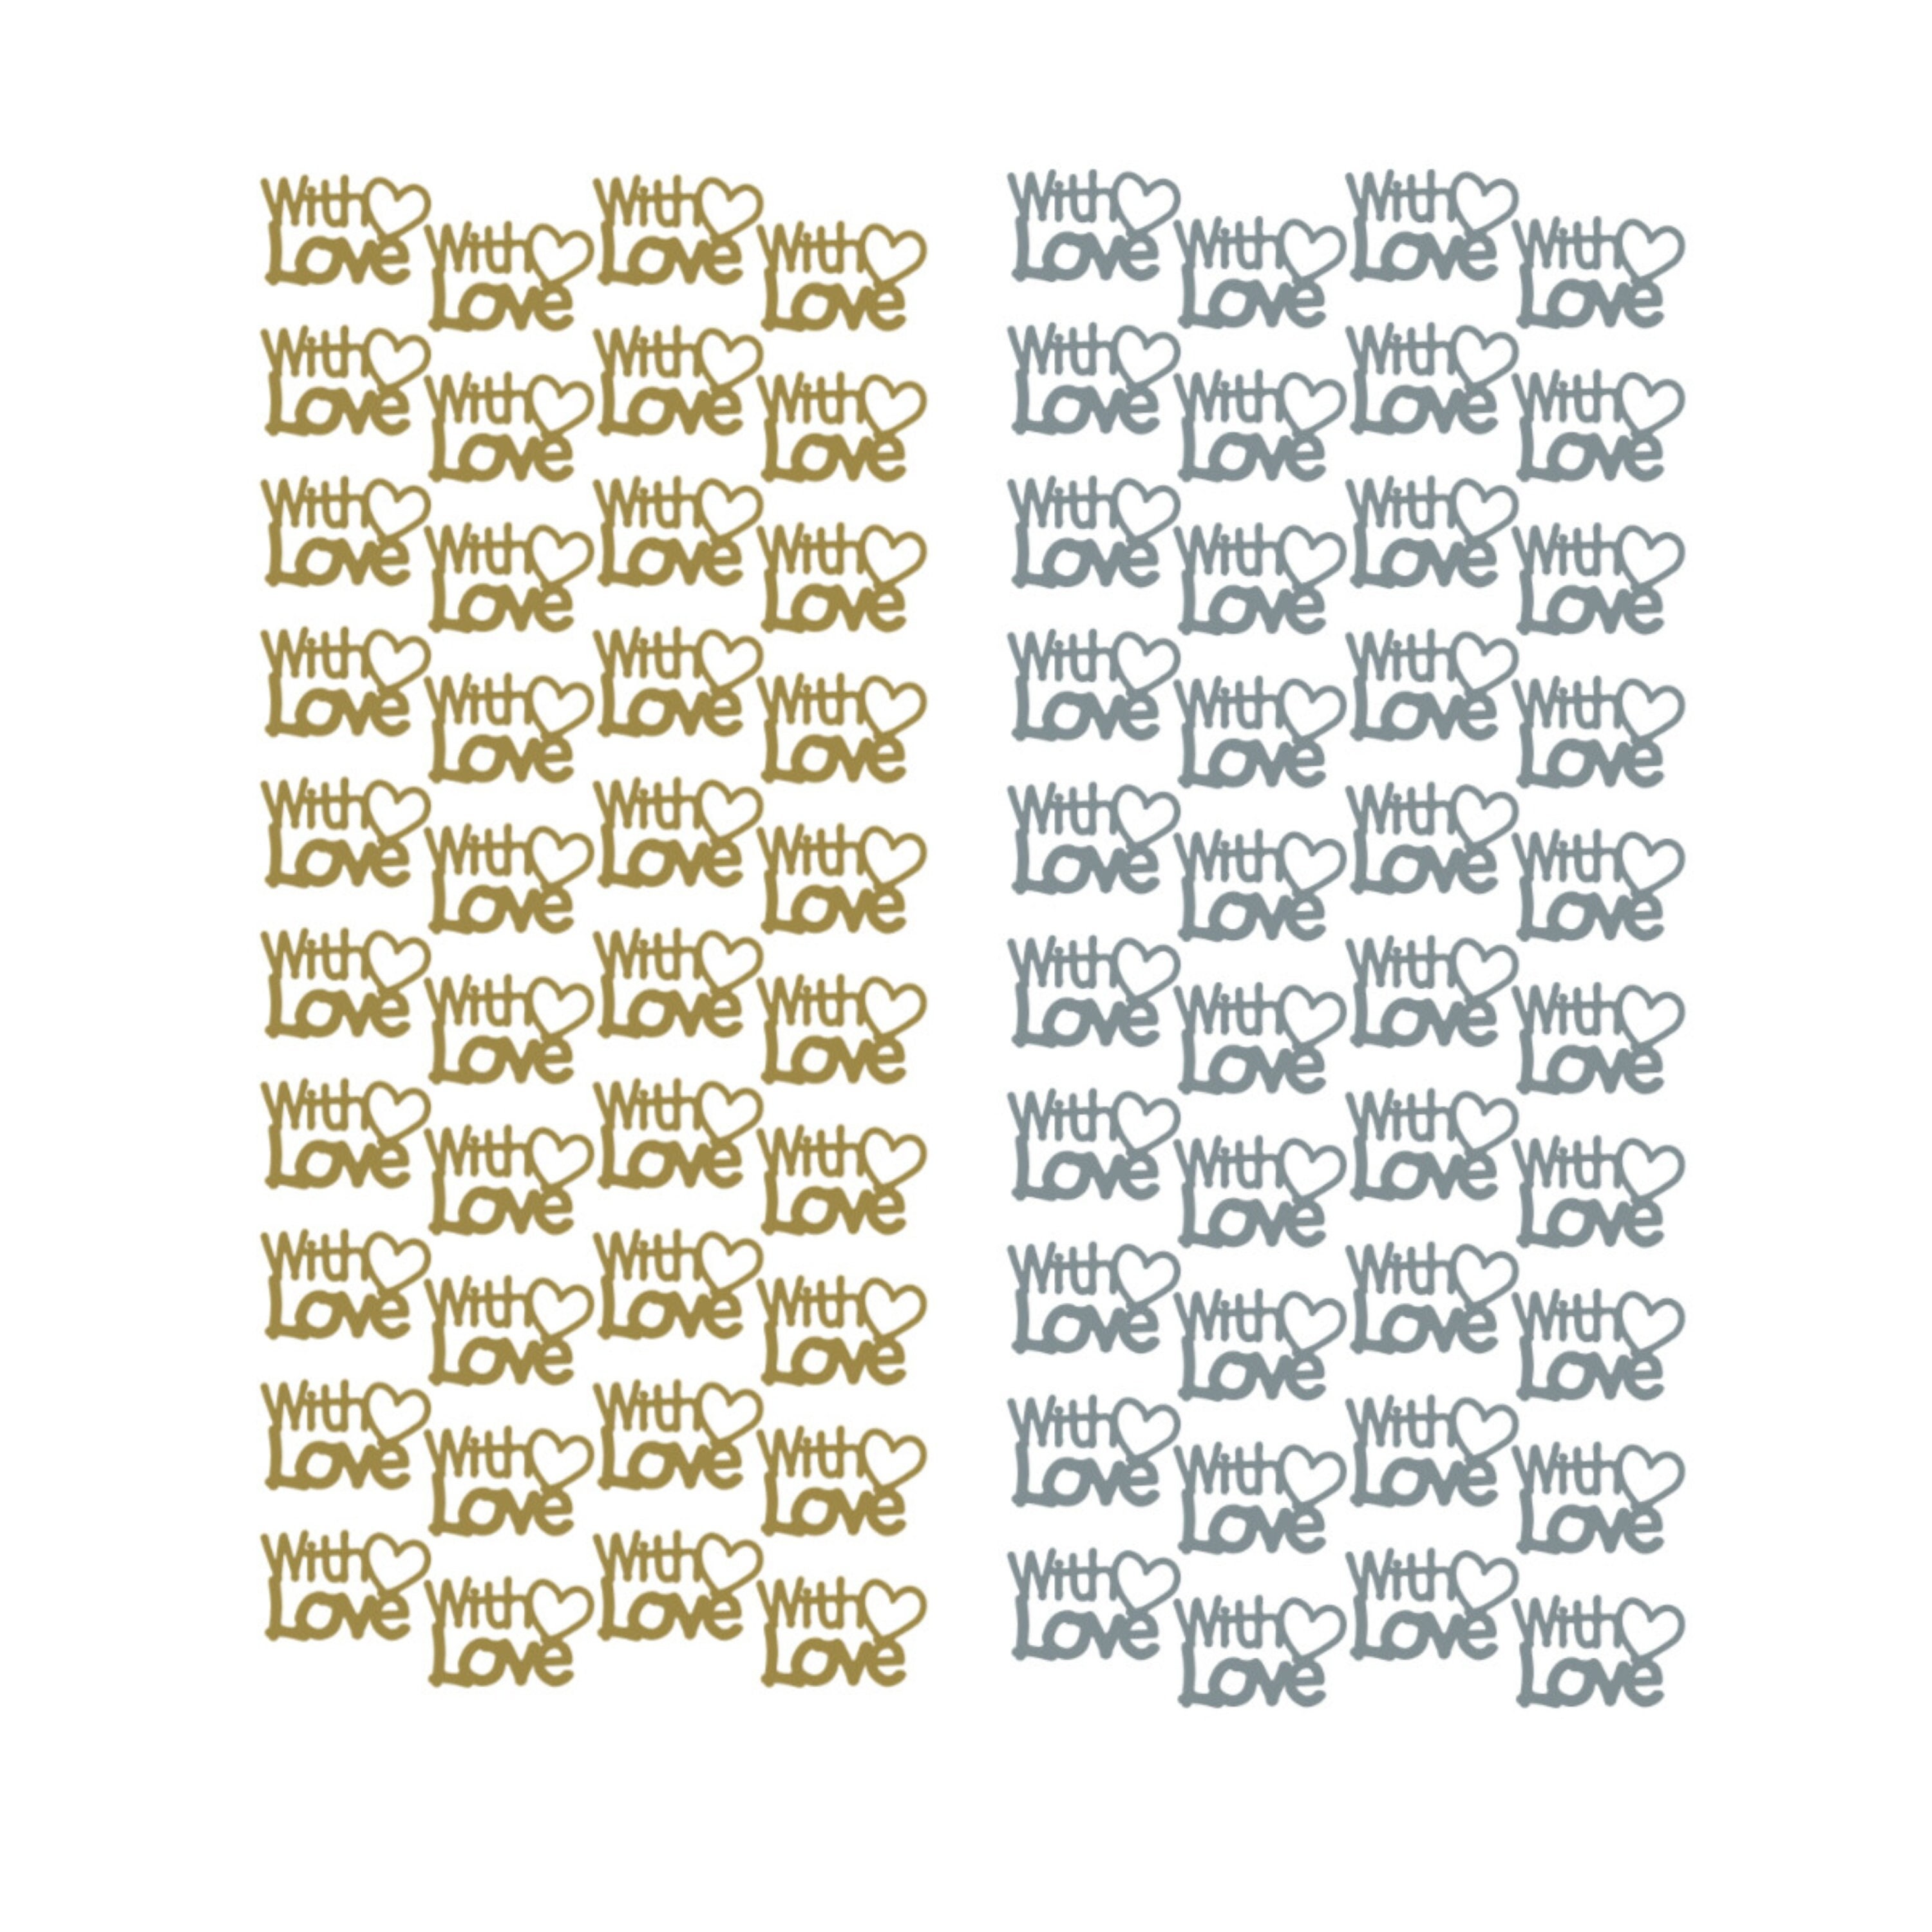 Gold Star Stickers Self Adhesive 700 Stars Sticky Peel and Stick